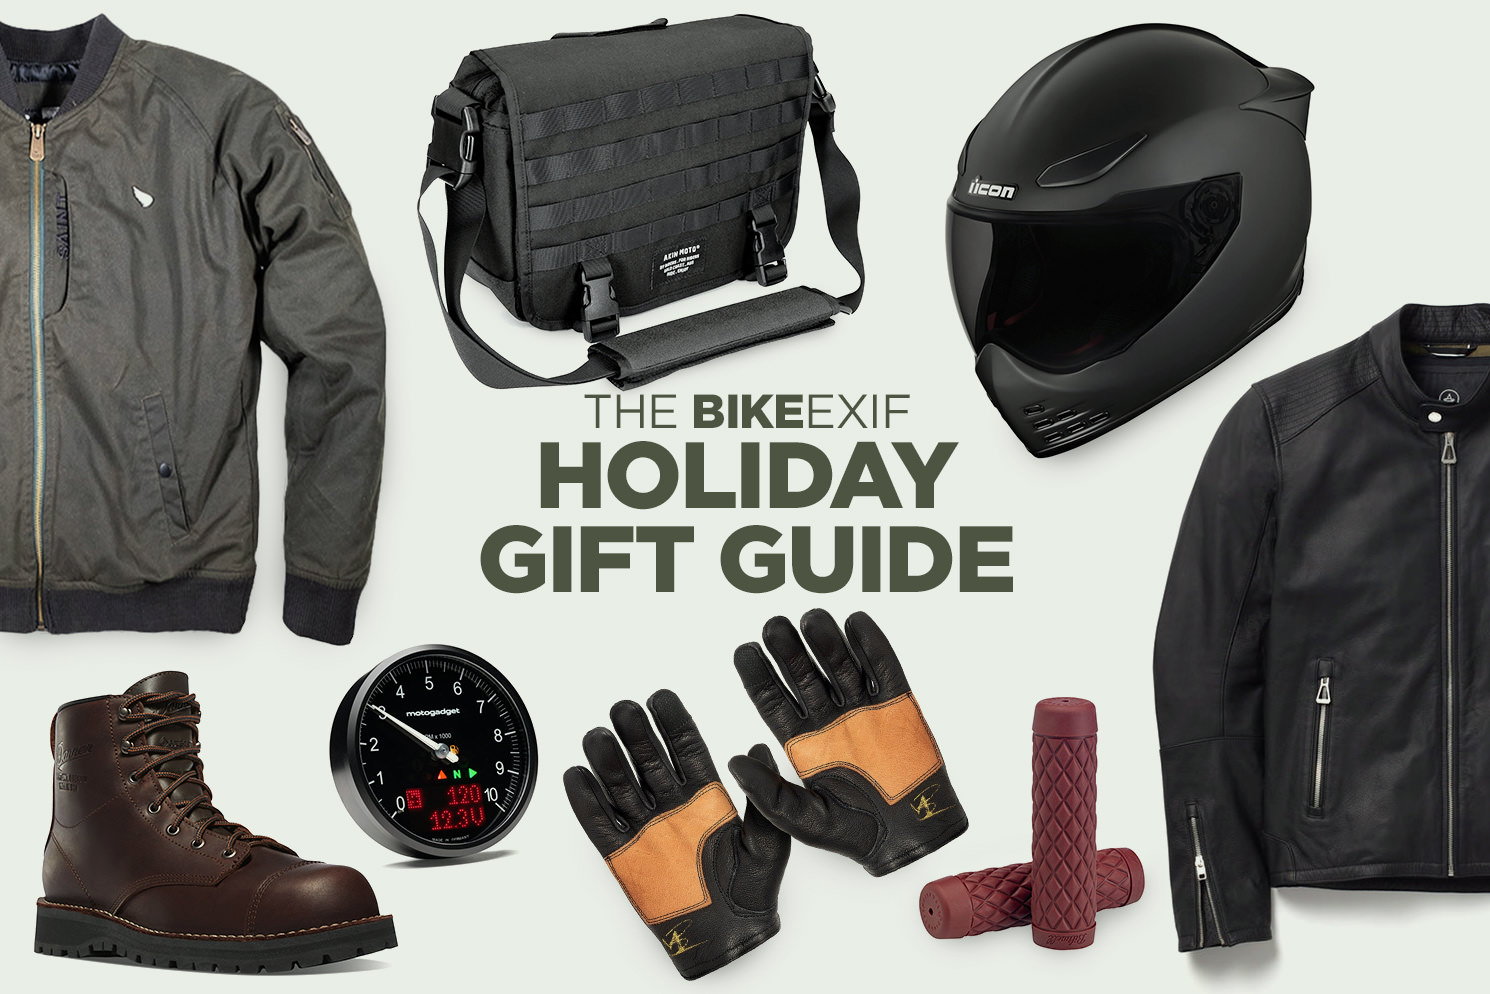 Rider's 2017 Holiday Gift Guide